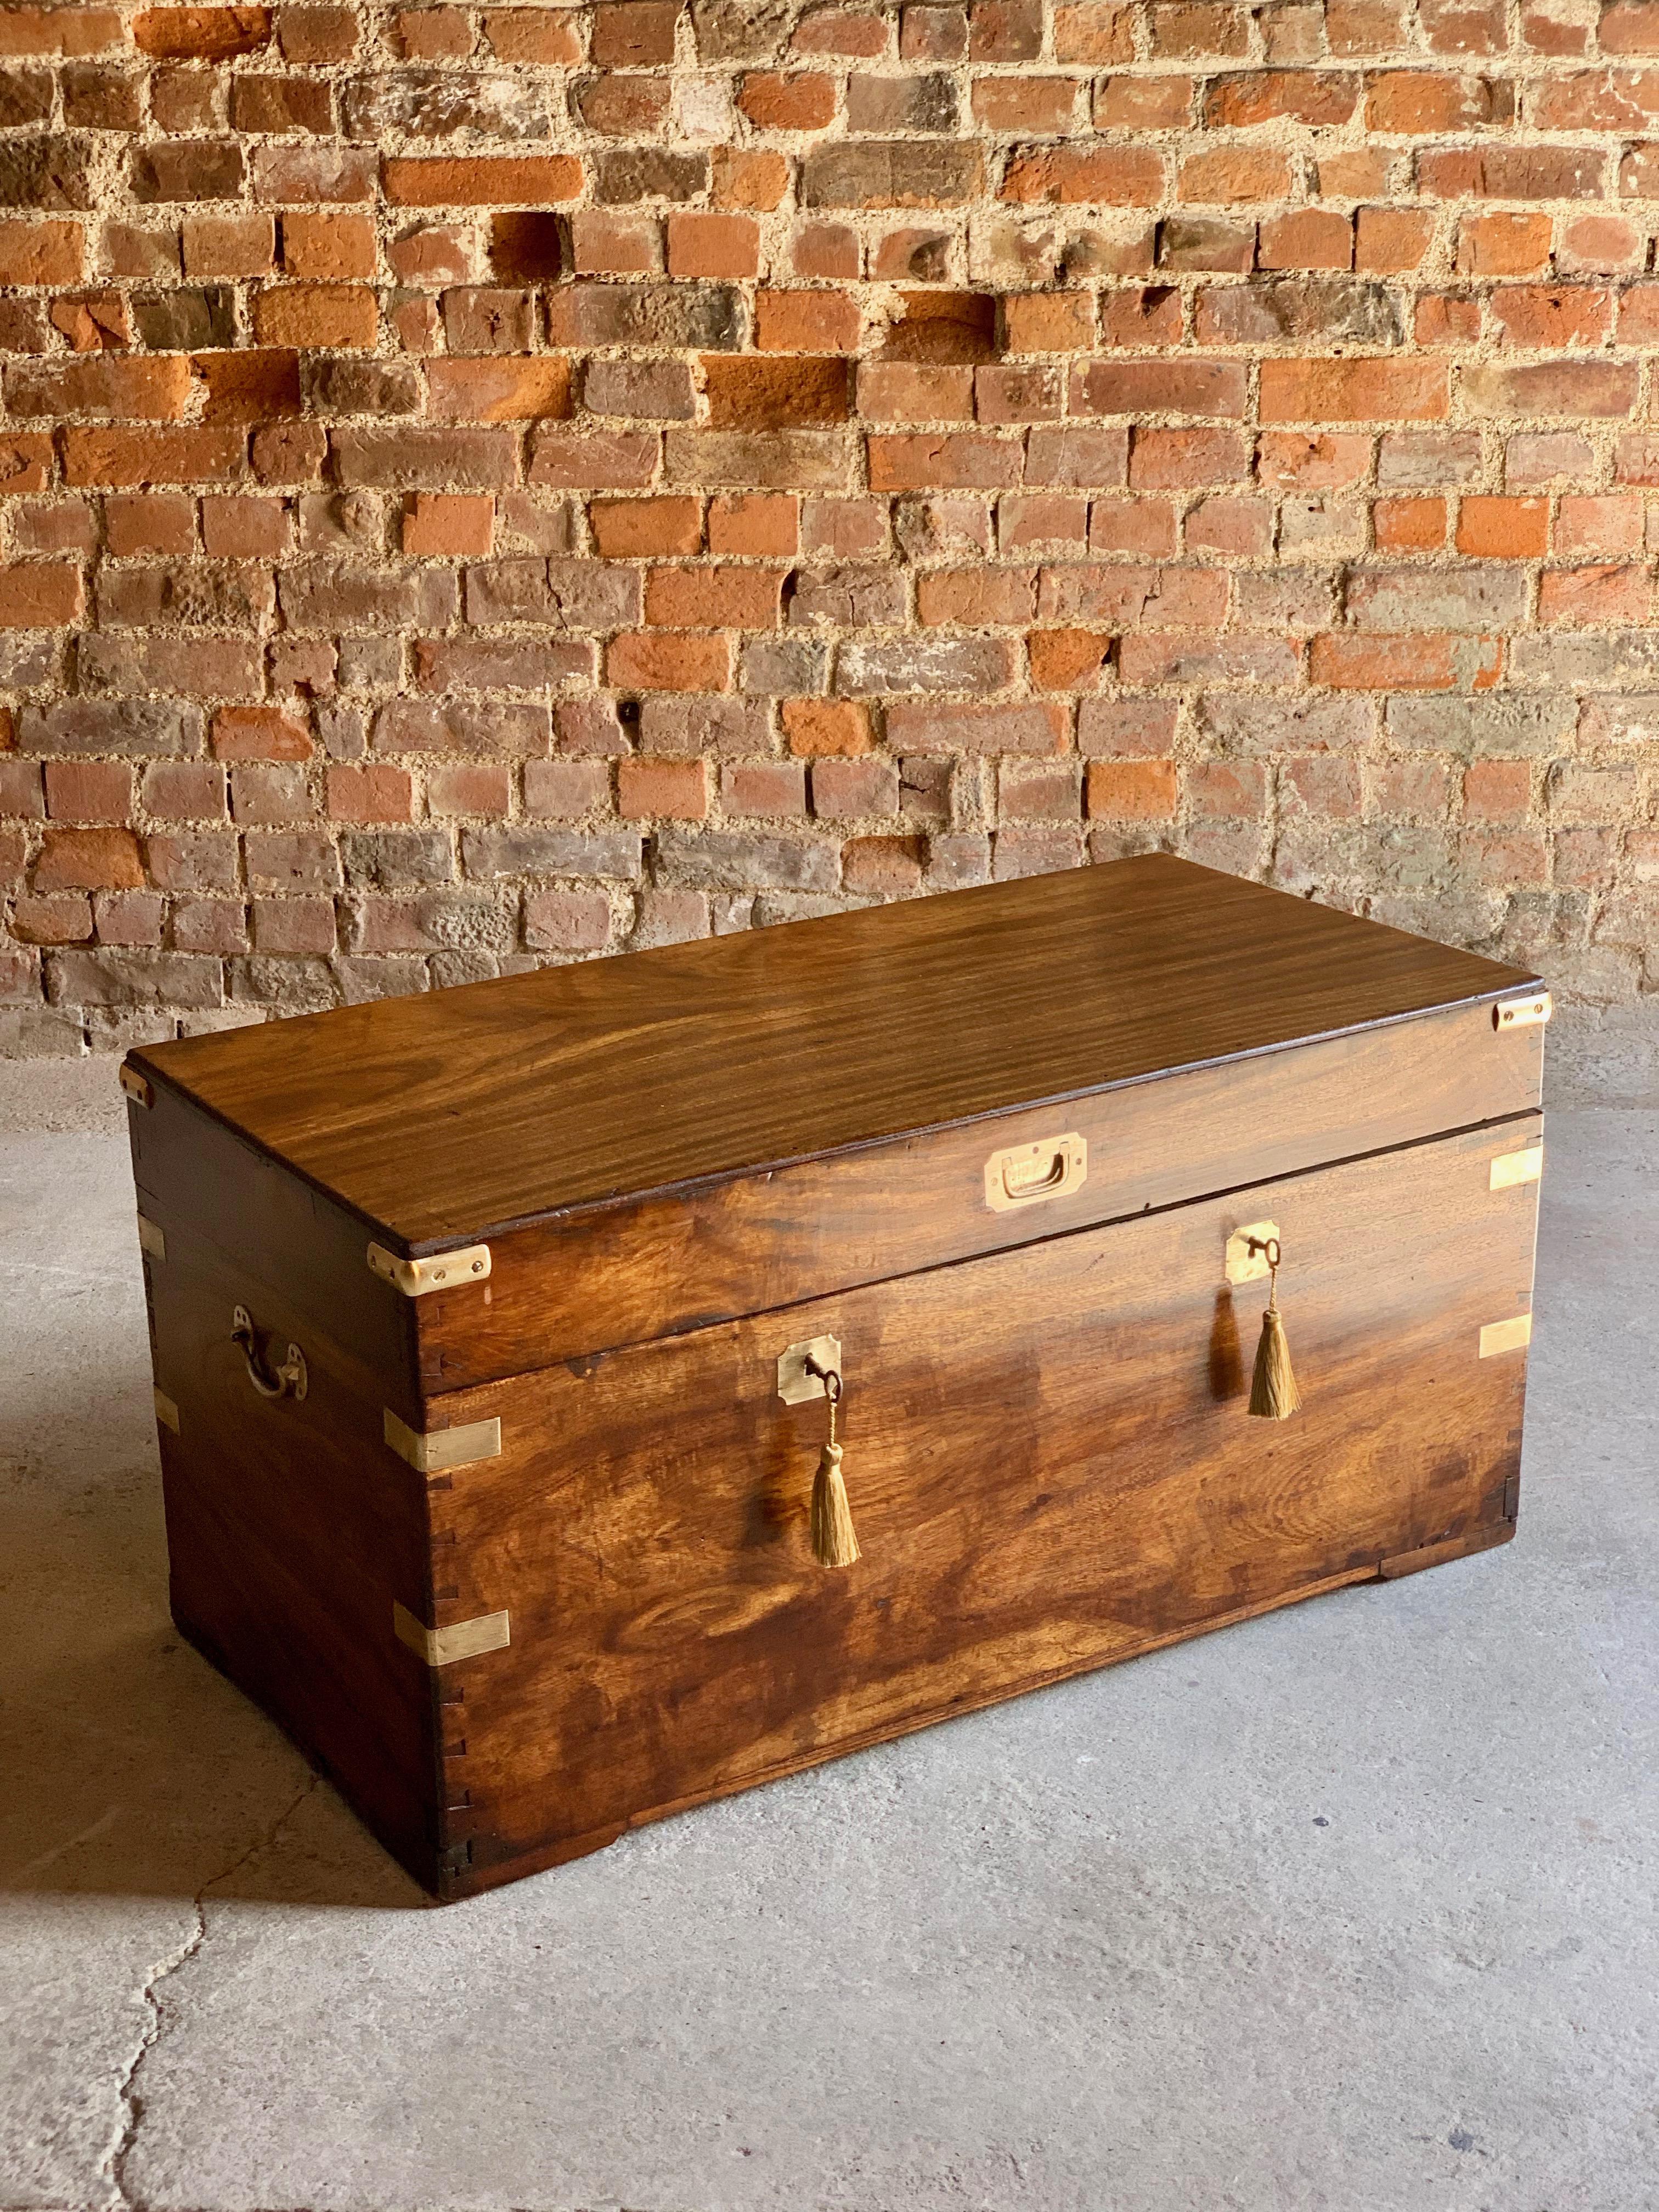 Victorian Military Campaign Trunk Chest Teak Camphor Wood, circa 1850 Number 25 4